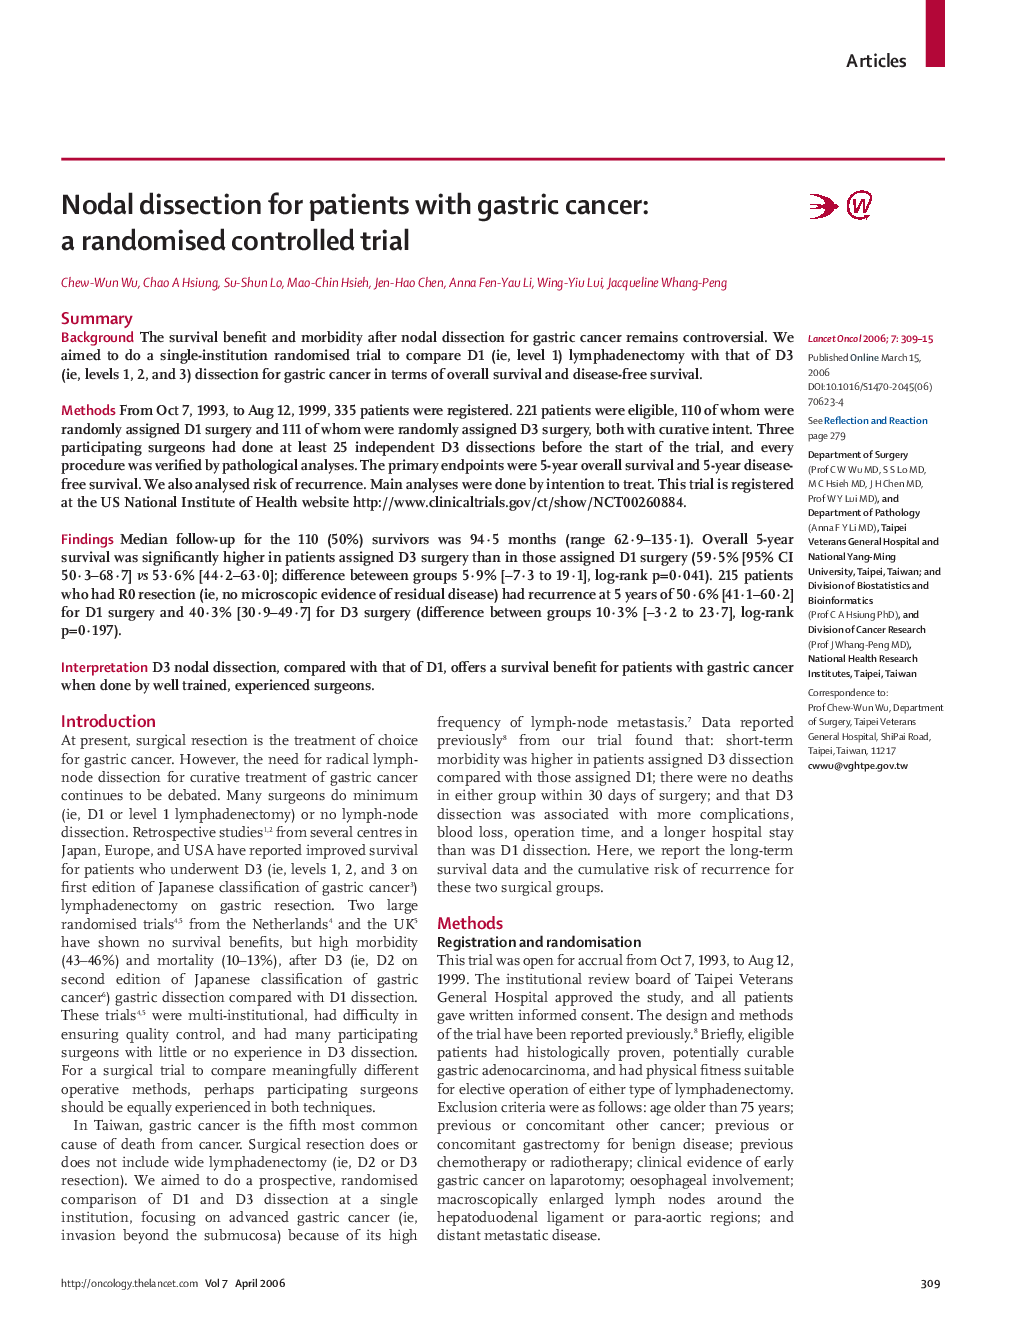 Nodal dissection for patients with gastric cancer: a randomised controlled trial